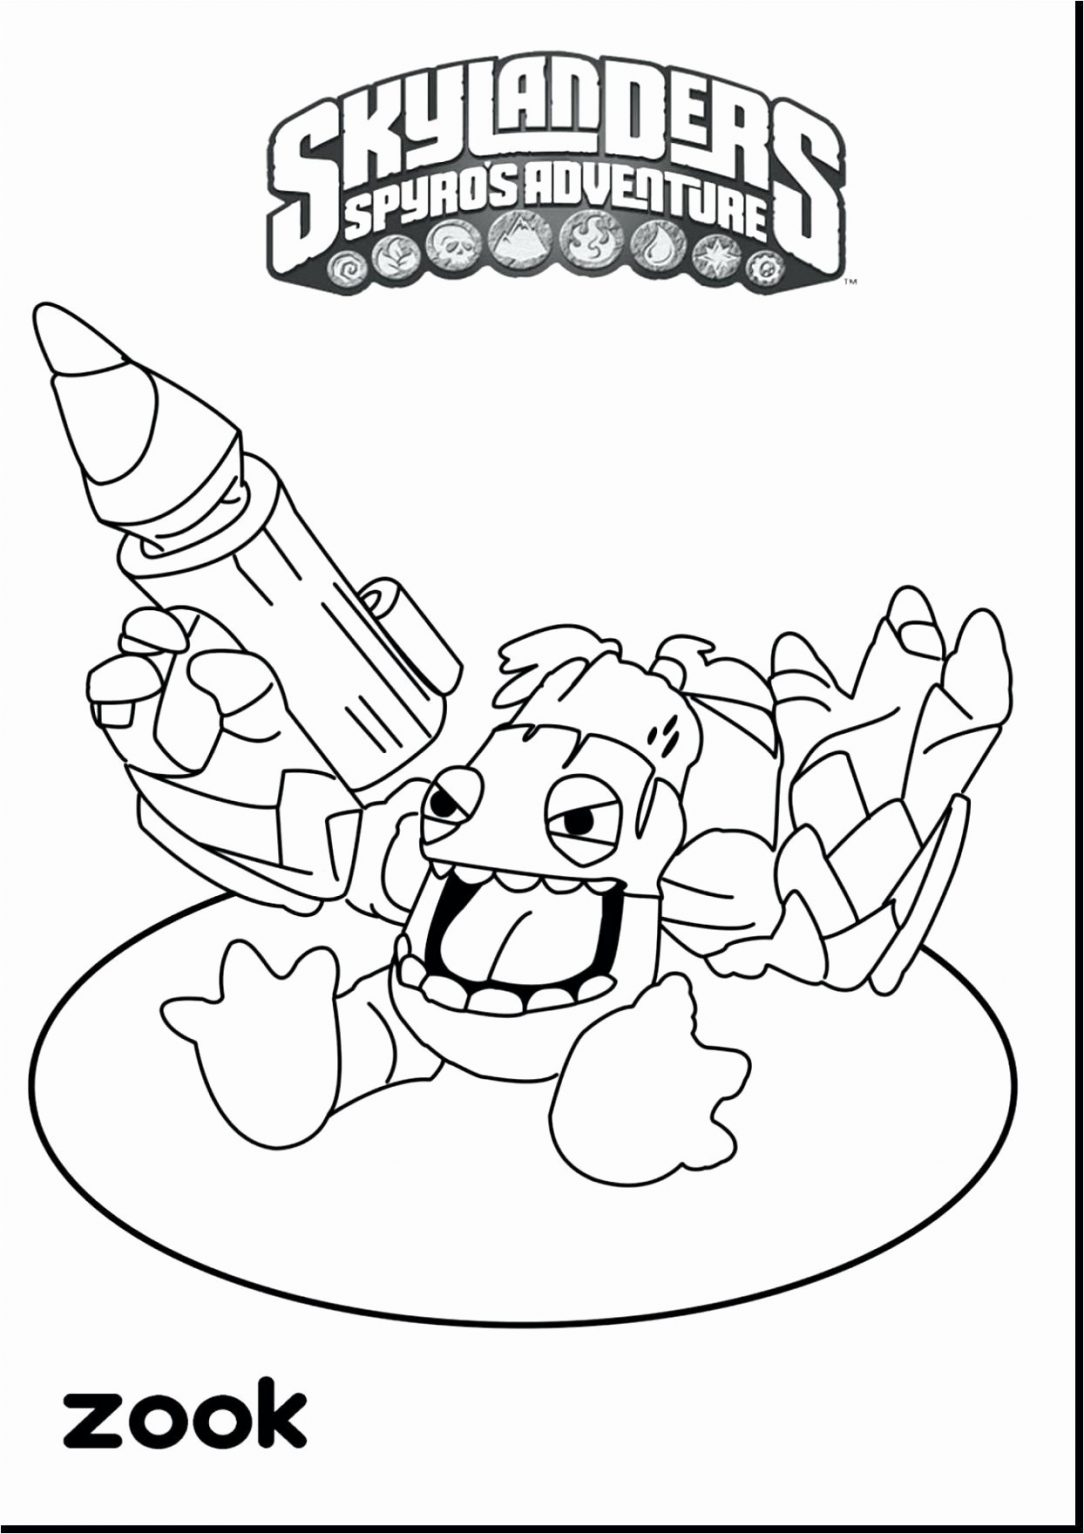 Food Pyramid Coloring Pages Food Group Pyramid Coloring Page Sheet Ancient Egypt New Pdf